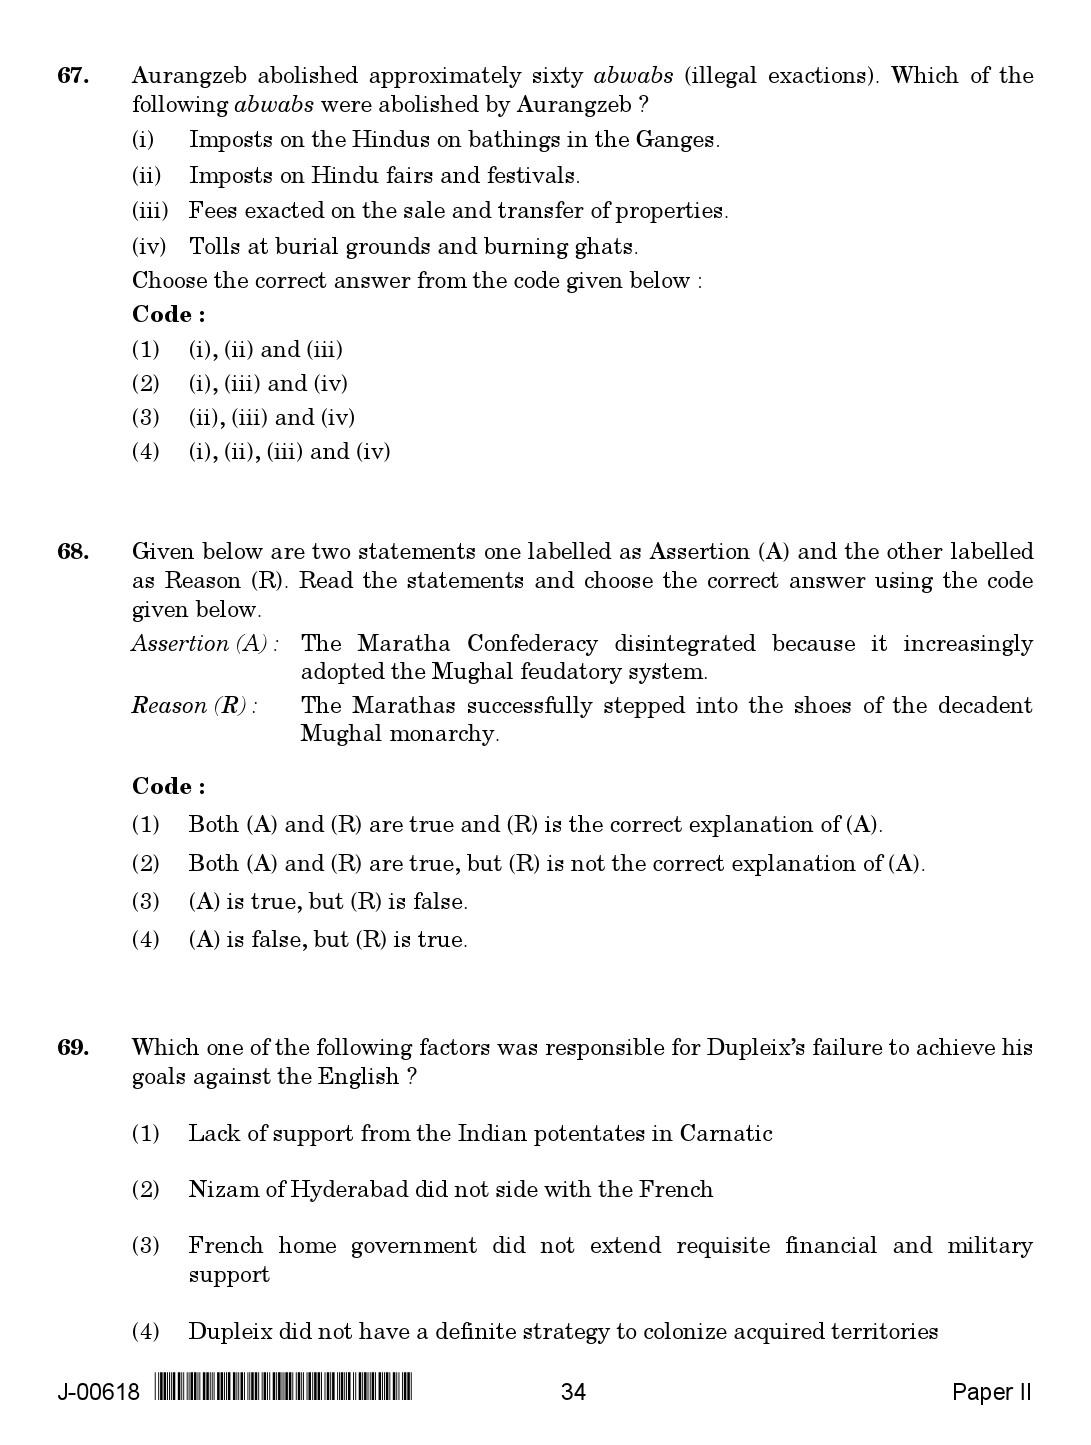 History Question Paper II July 2018 in English 2nd Exam 18